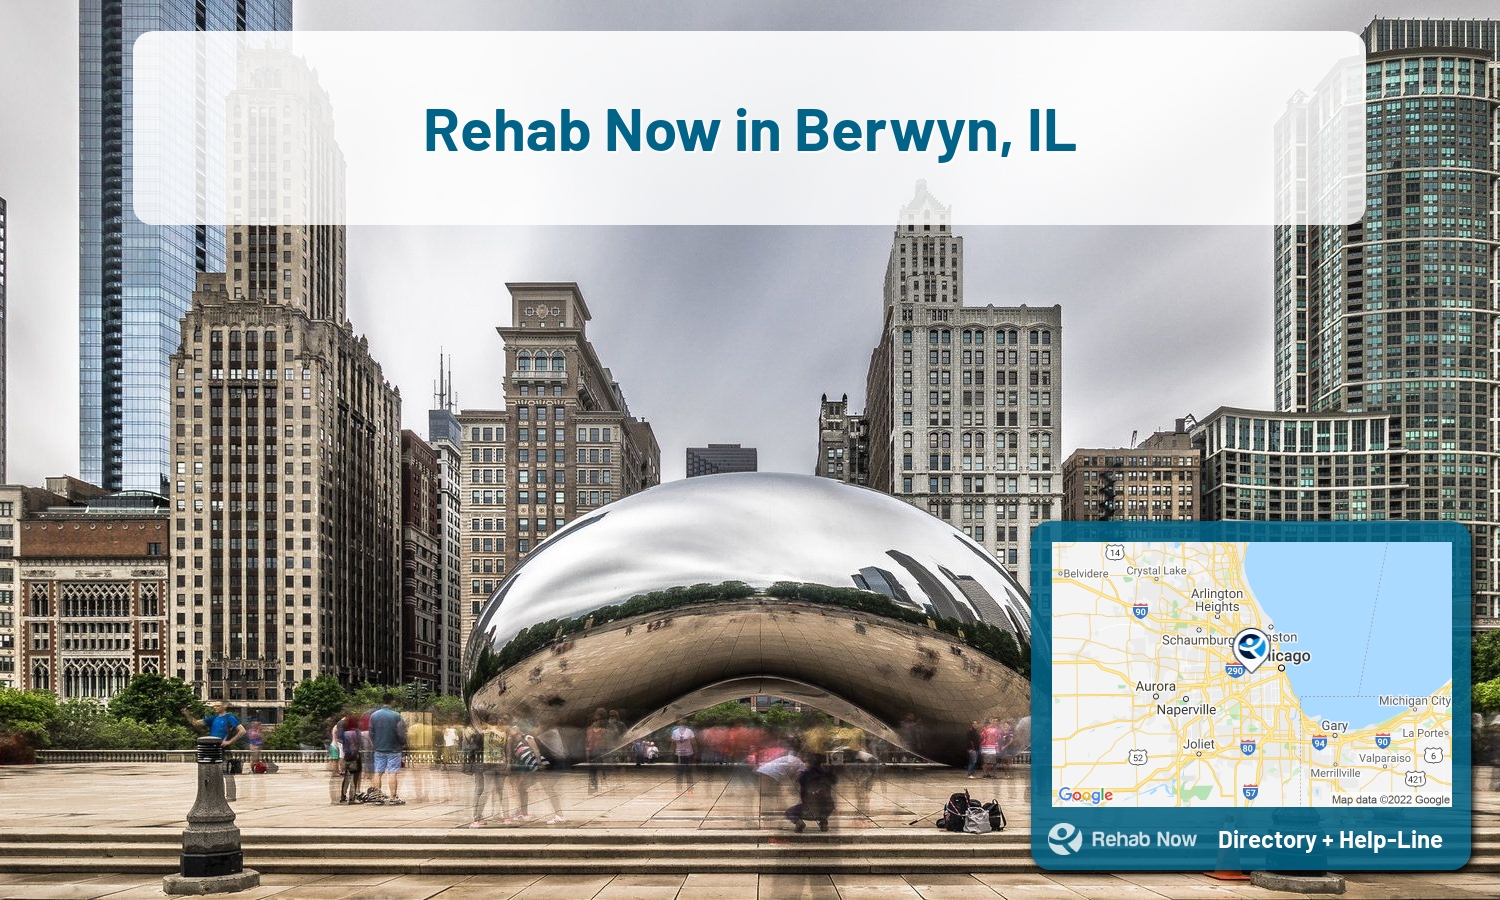 Drug rehab and alcohol treatment services nearby Berwyn, IL. Need help choosing a treatment program? Call our free hotline!